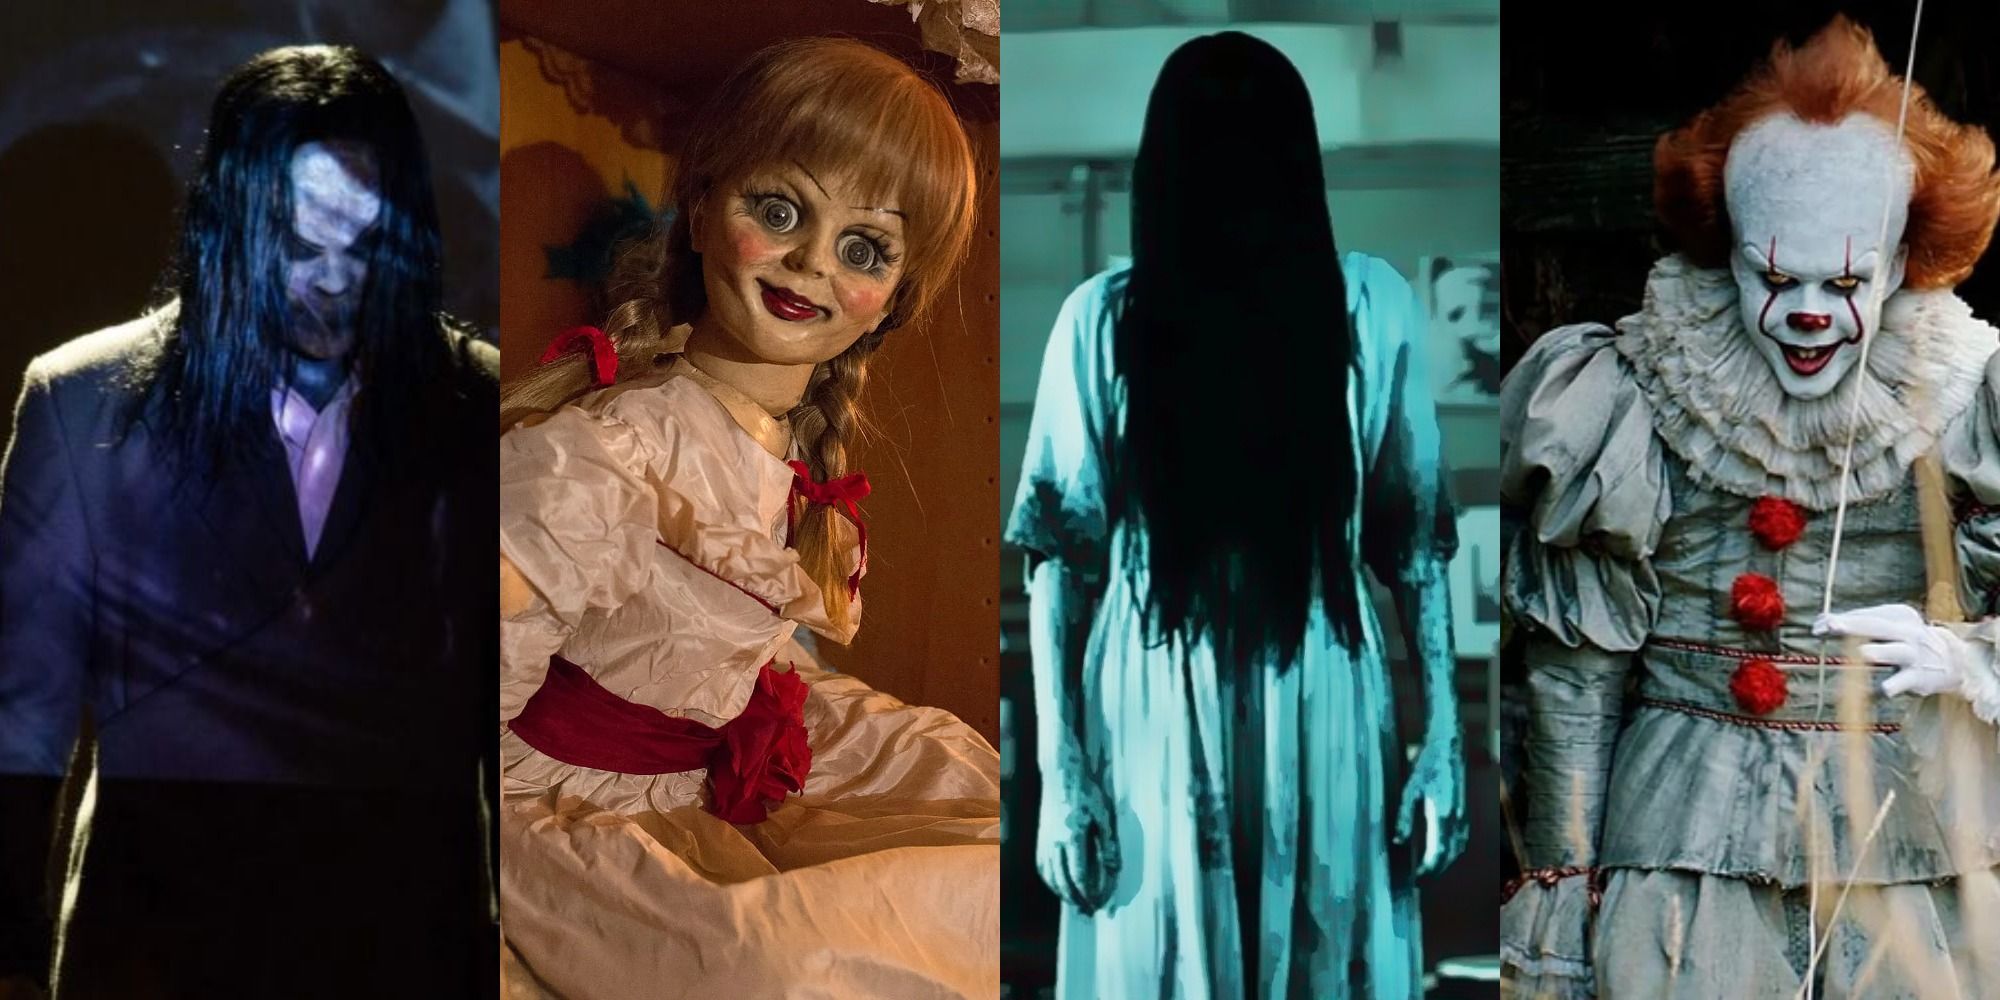 Bunhuul, Annabelle the doll, Samara from The Ring, and Pennywise the clown